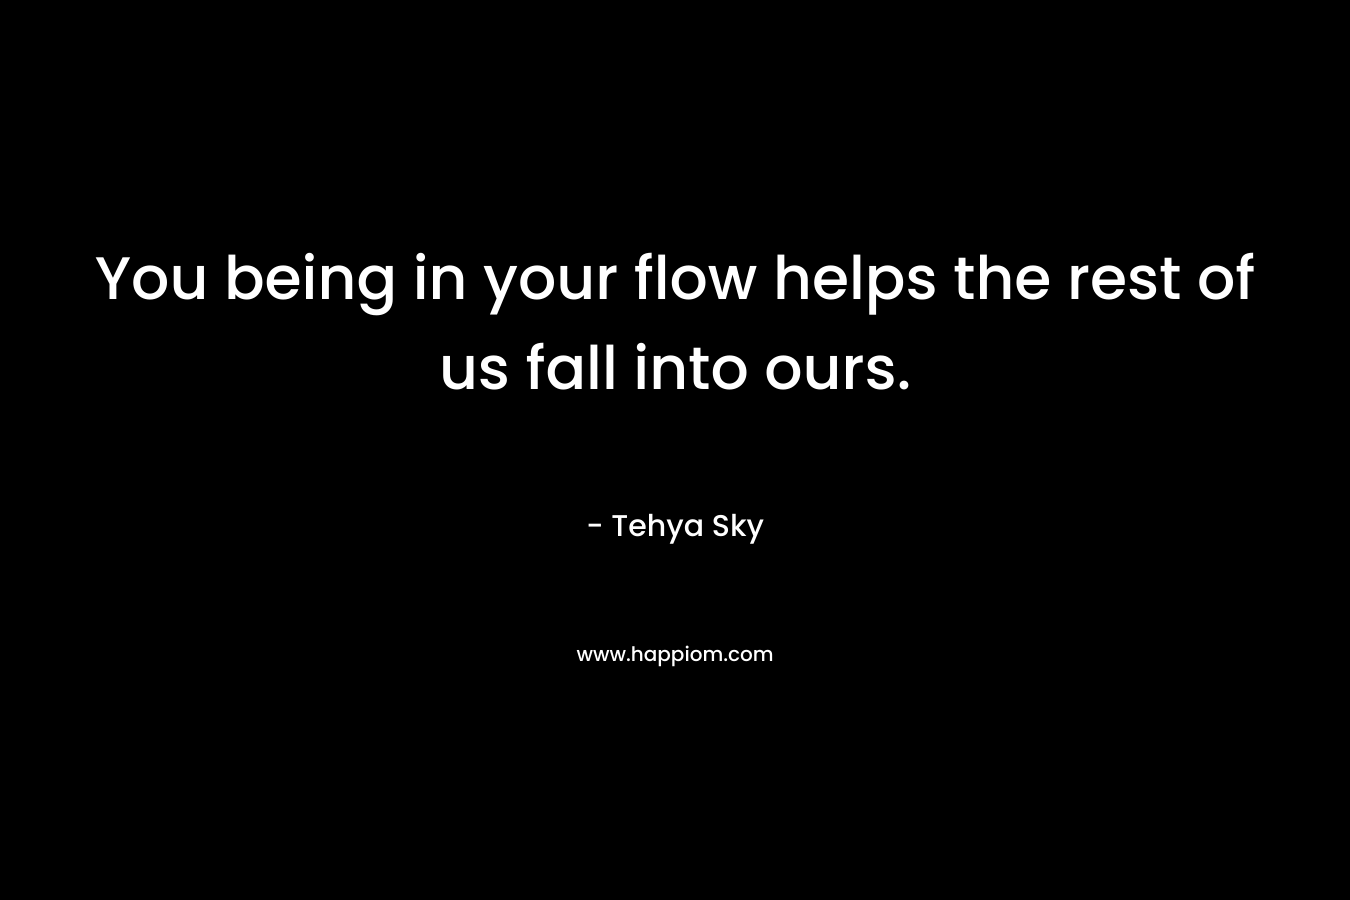 You being in your flow helps the rest of us fall into ours. – Tehya Sky